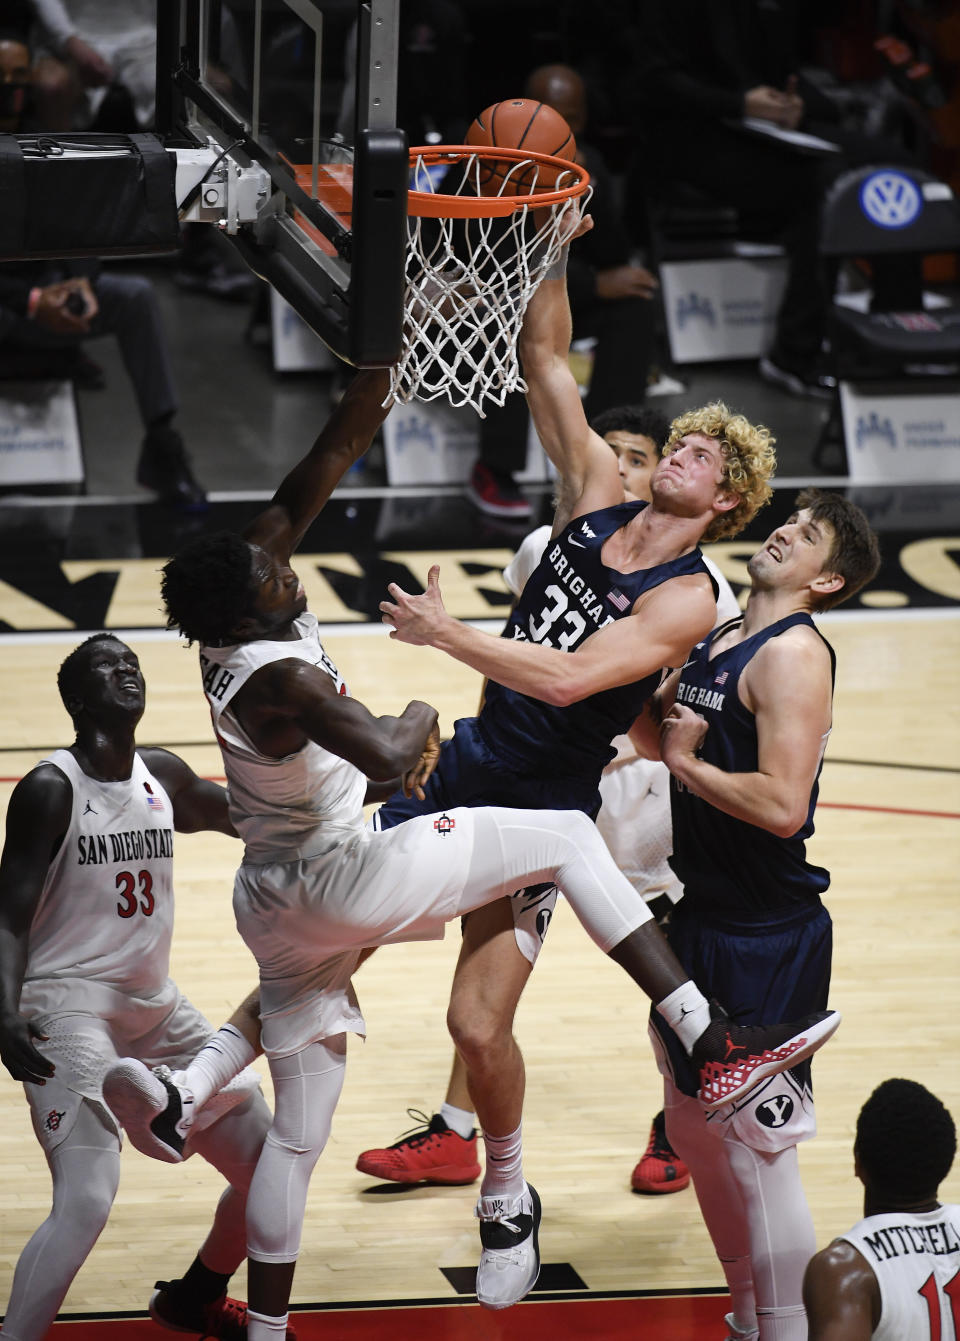 BYU forward Caleb Lohner (33) shoots over San Diego State forward Nathan Mensah (31) during the first half of an NCAA college basketball game Friday, Dec. 18, 2020, in San Diego. (AP Photo/Denis Poroy)